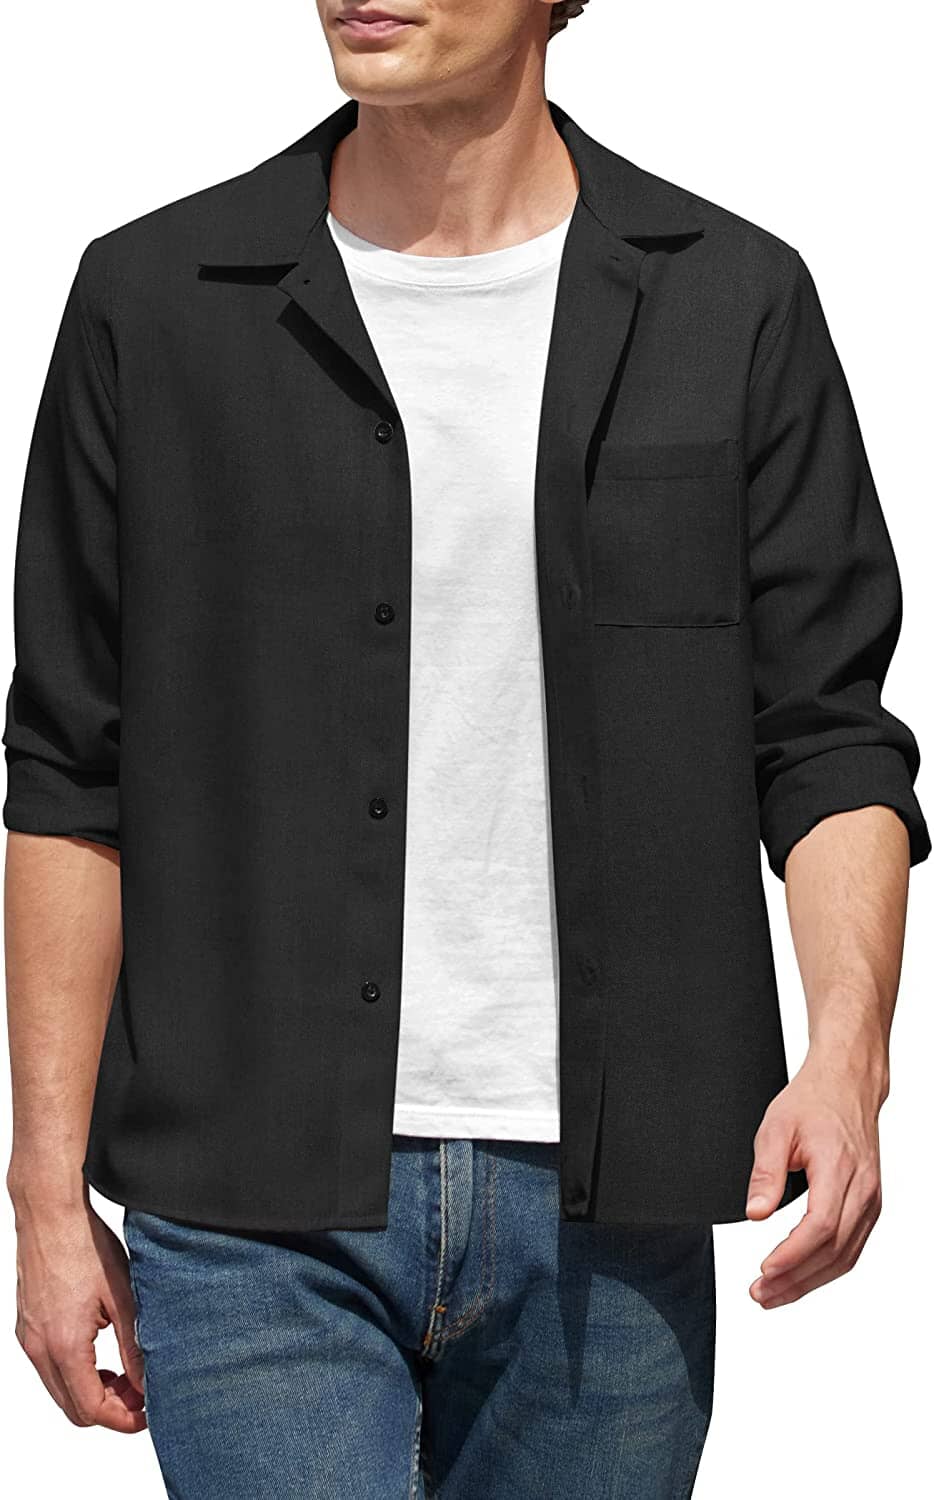 Casual Button Down Long Sleeve Shirt (US Only) Shirts COOFANDY Store Black S 